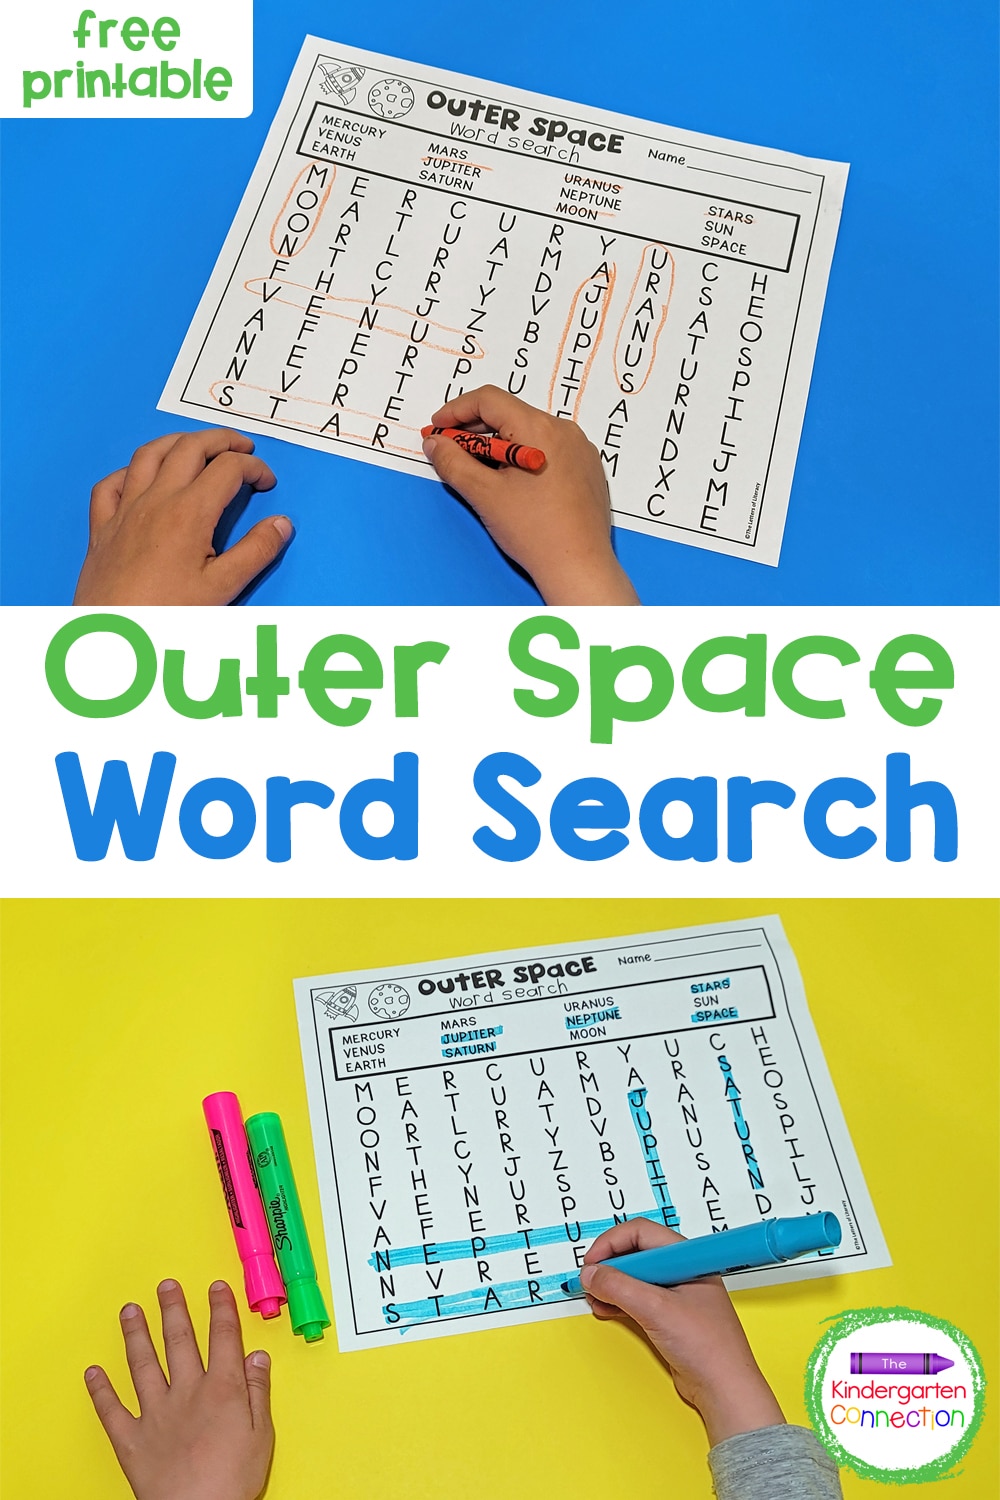 Search for the planets and more with this fun and free Outer Space Word Search for kids! It's perfect for early readers!